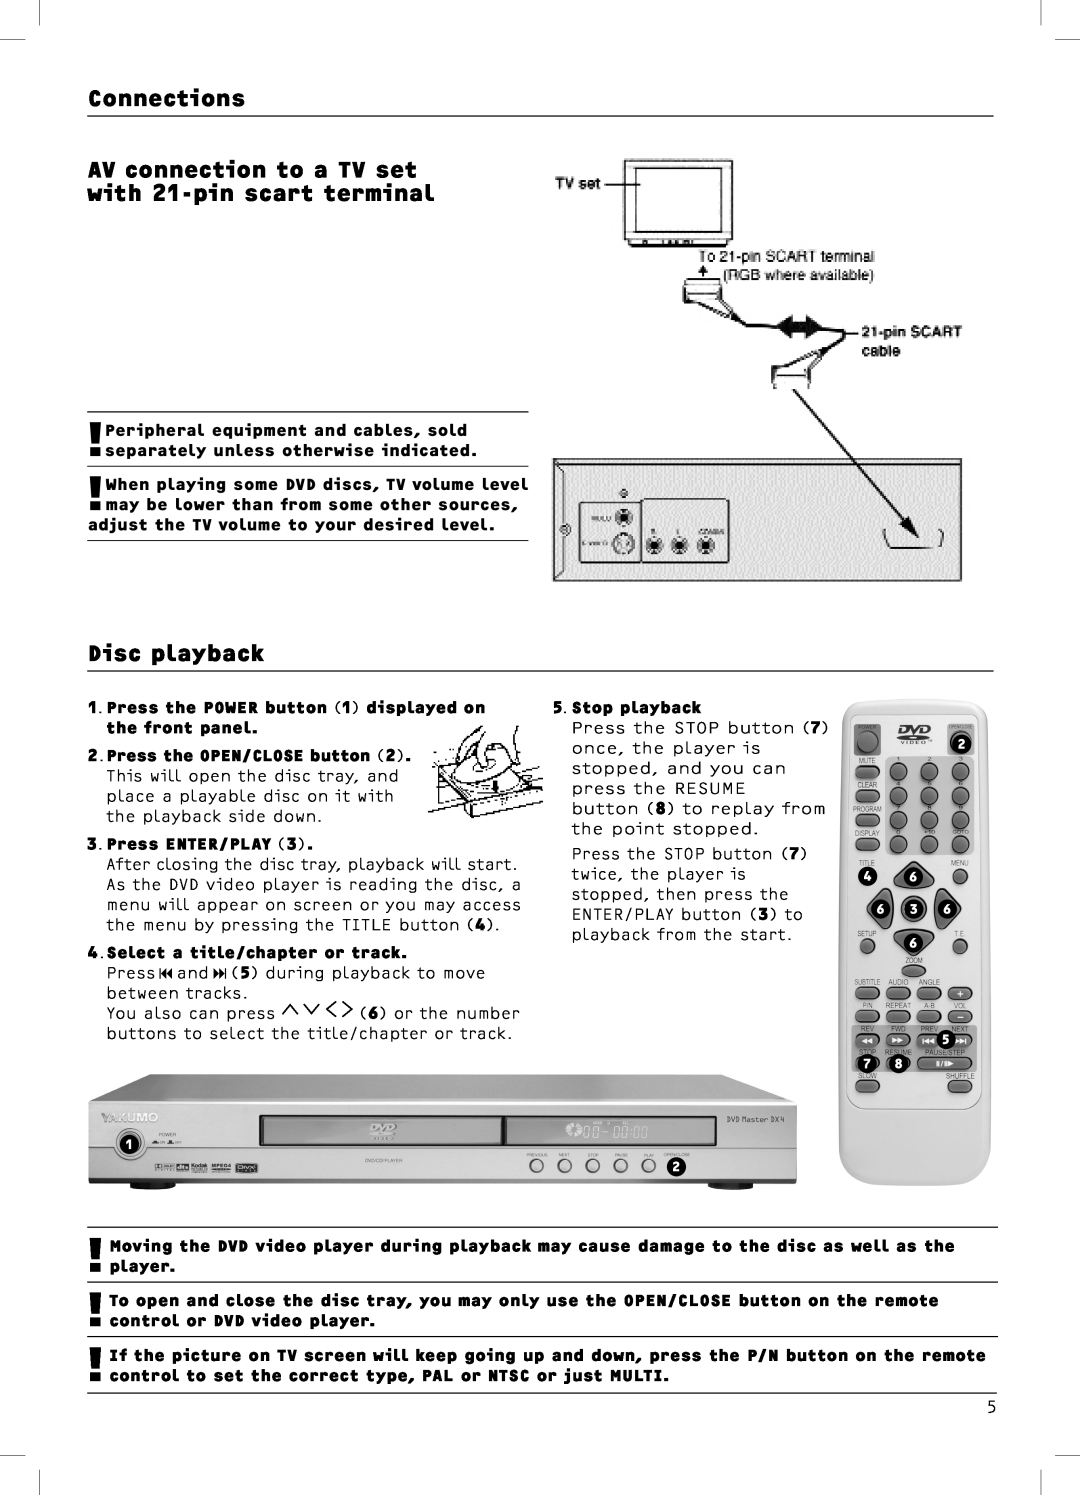 Dolby Laboratories DX4 manual Connections AV connection to a TV set with 21-pin scart terminal, Disc playback 